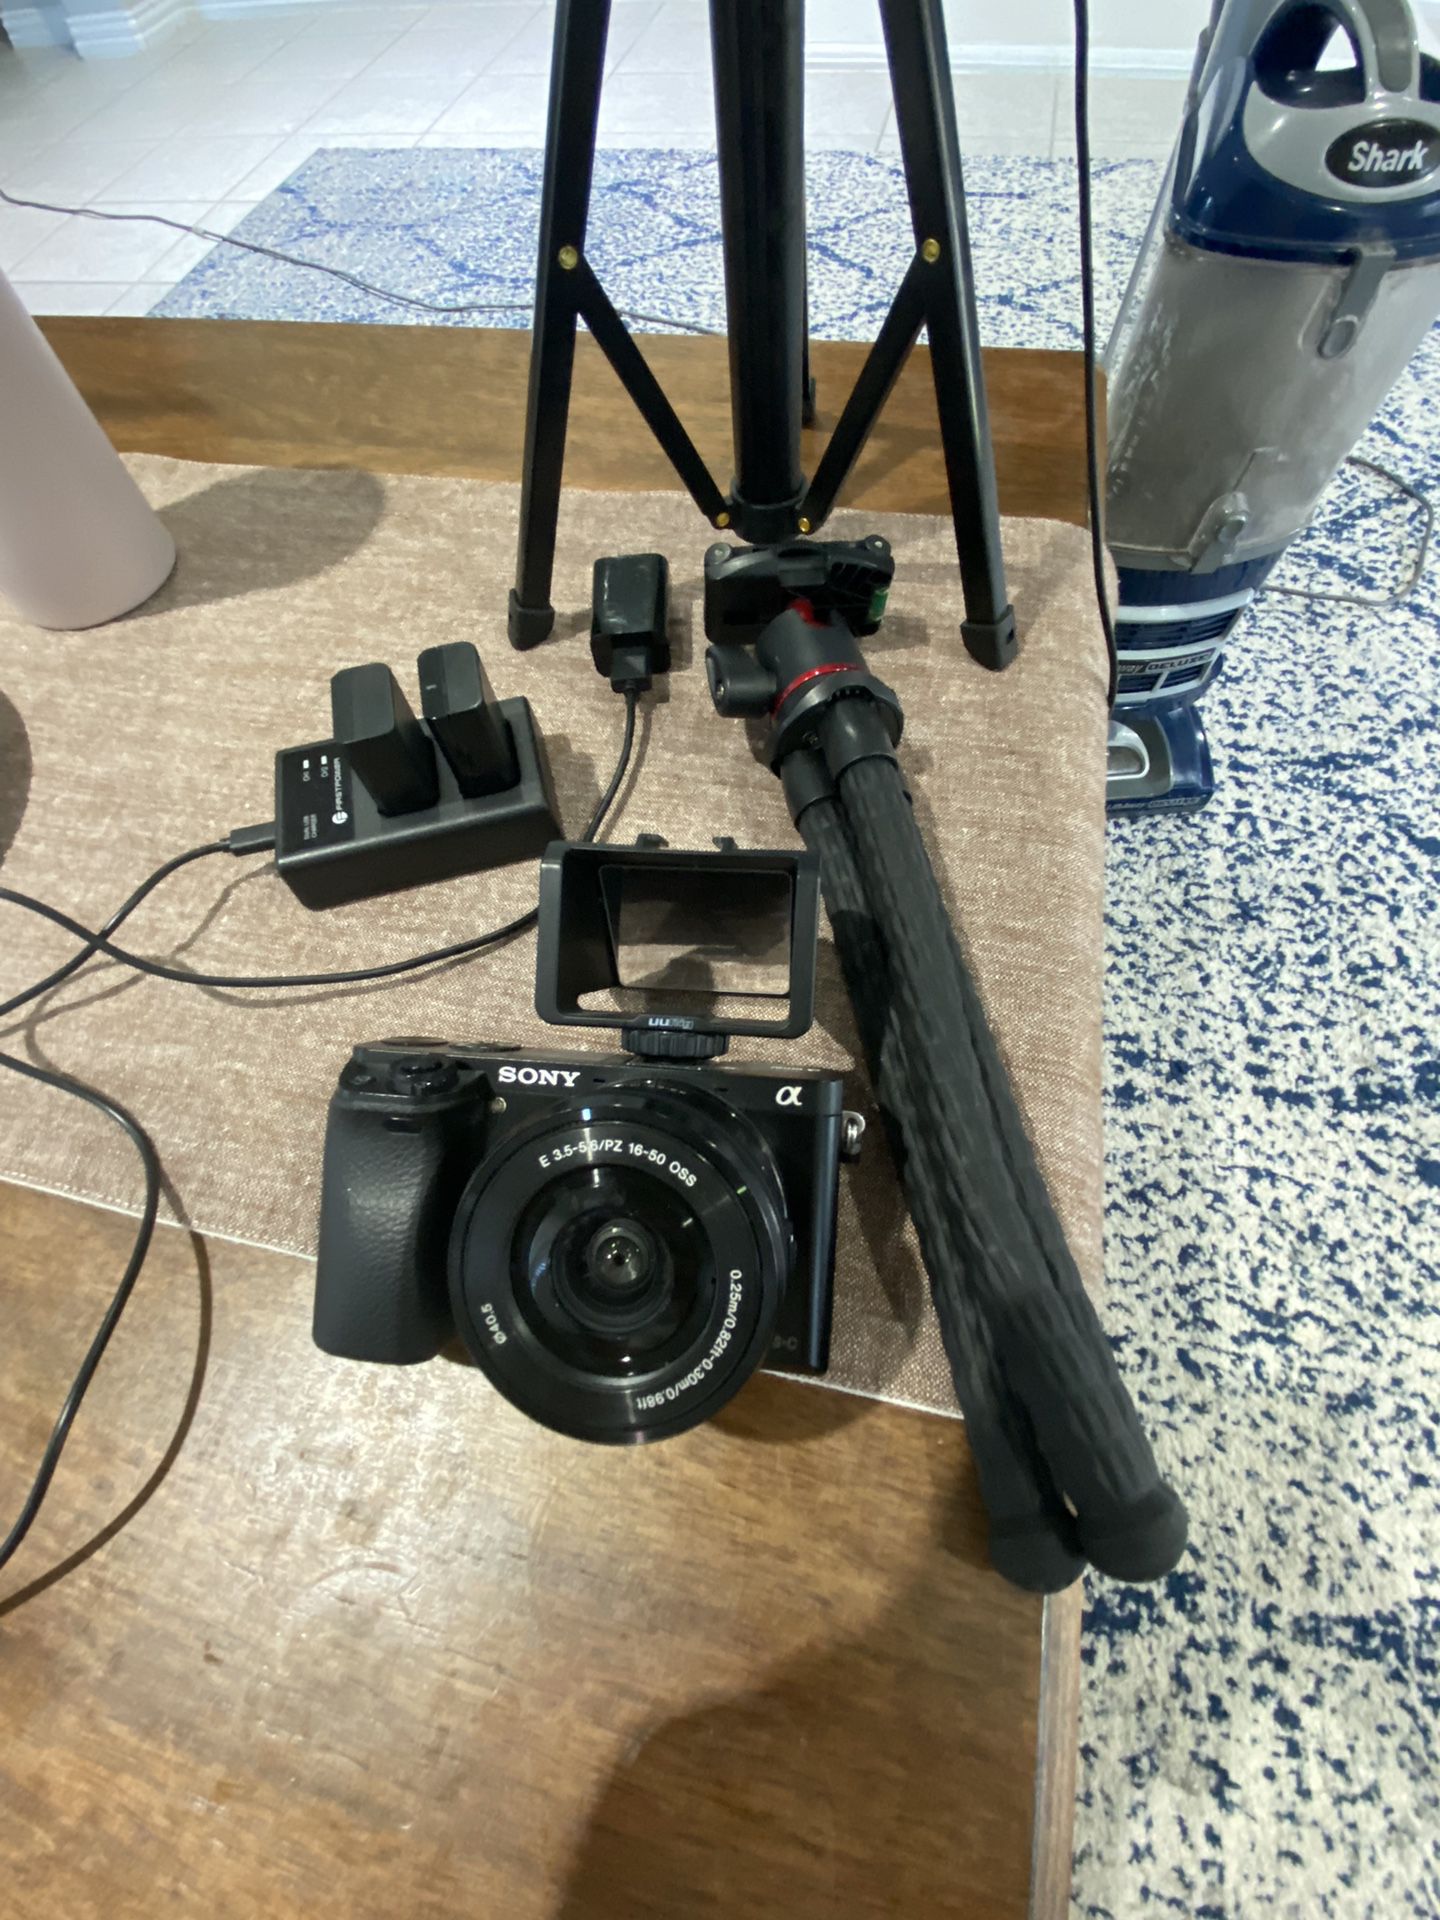 Sony a6000 camera with equipment